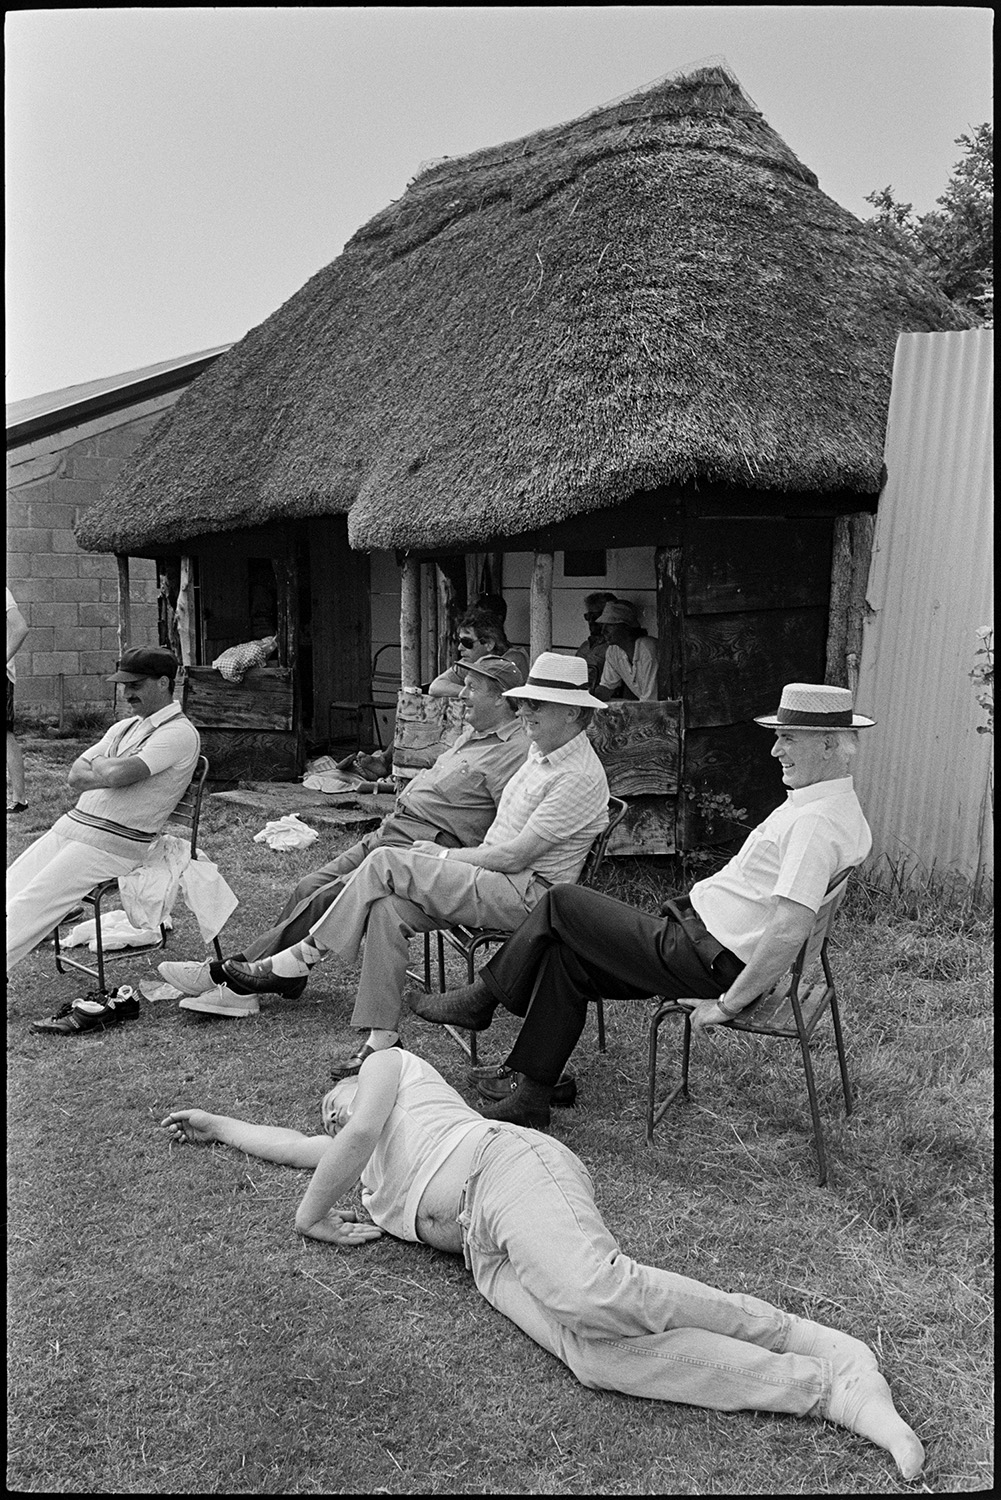 Church fete in garden, stalls, cakes, vicar making speech, thatched pavilion.
[Cricket players and spectators sitting and watching a match on the boundary at Chulmleigh cricket ground in Cricket Close, Chulmleigh, at the church fete. One man is lying on the ground asleep. Others are sitting inside the thatched and wooden framed pavilion.]